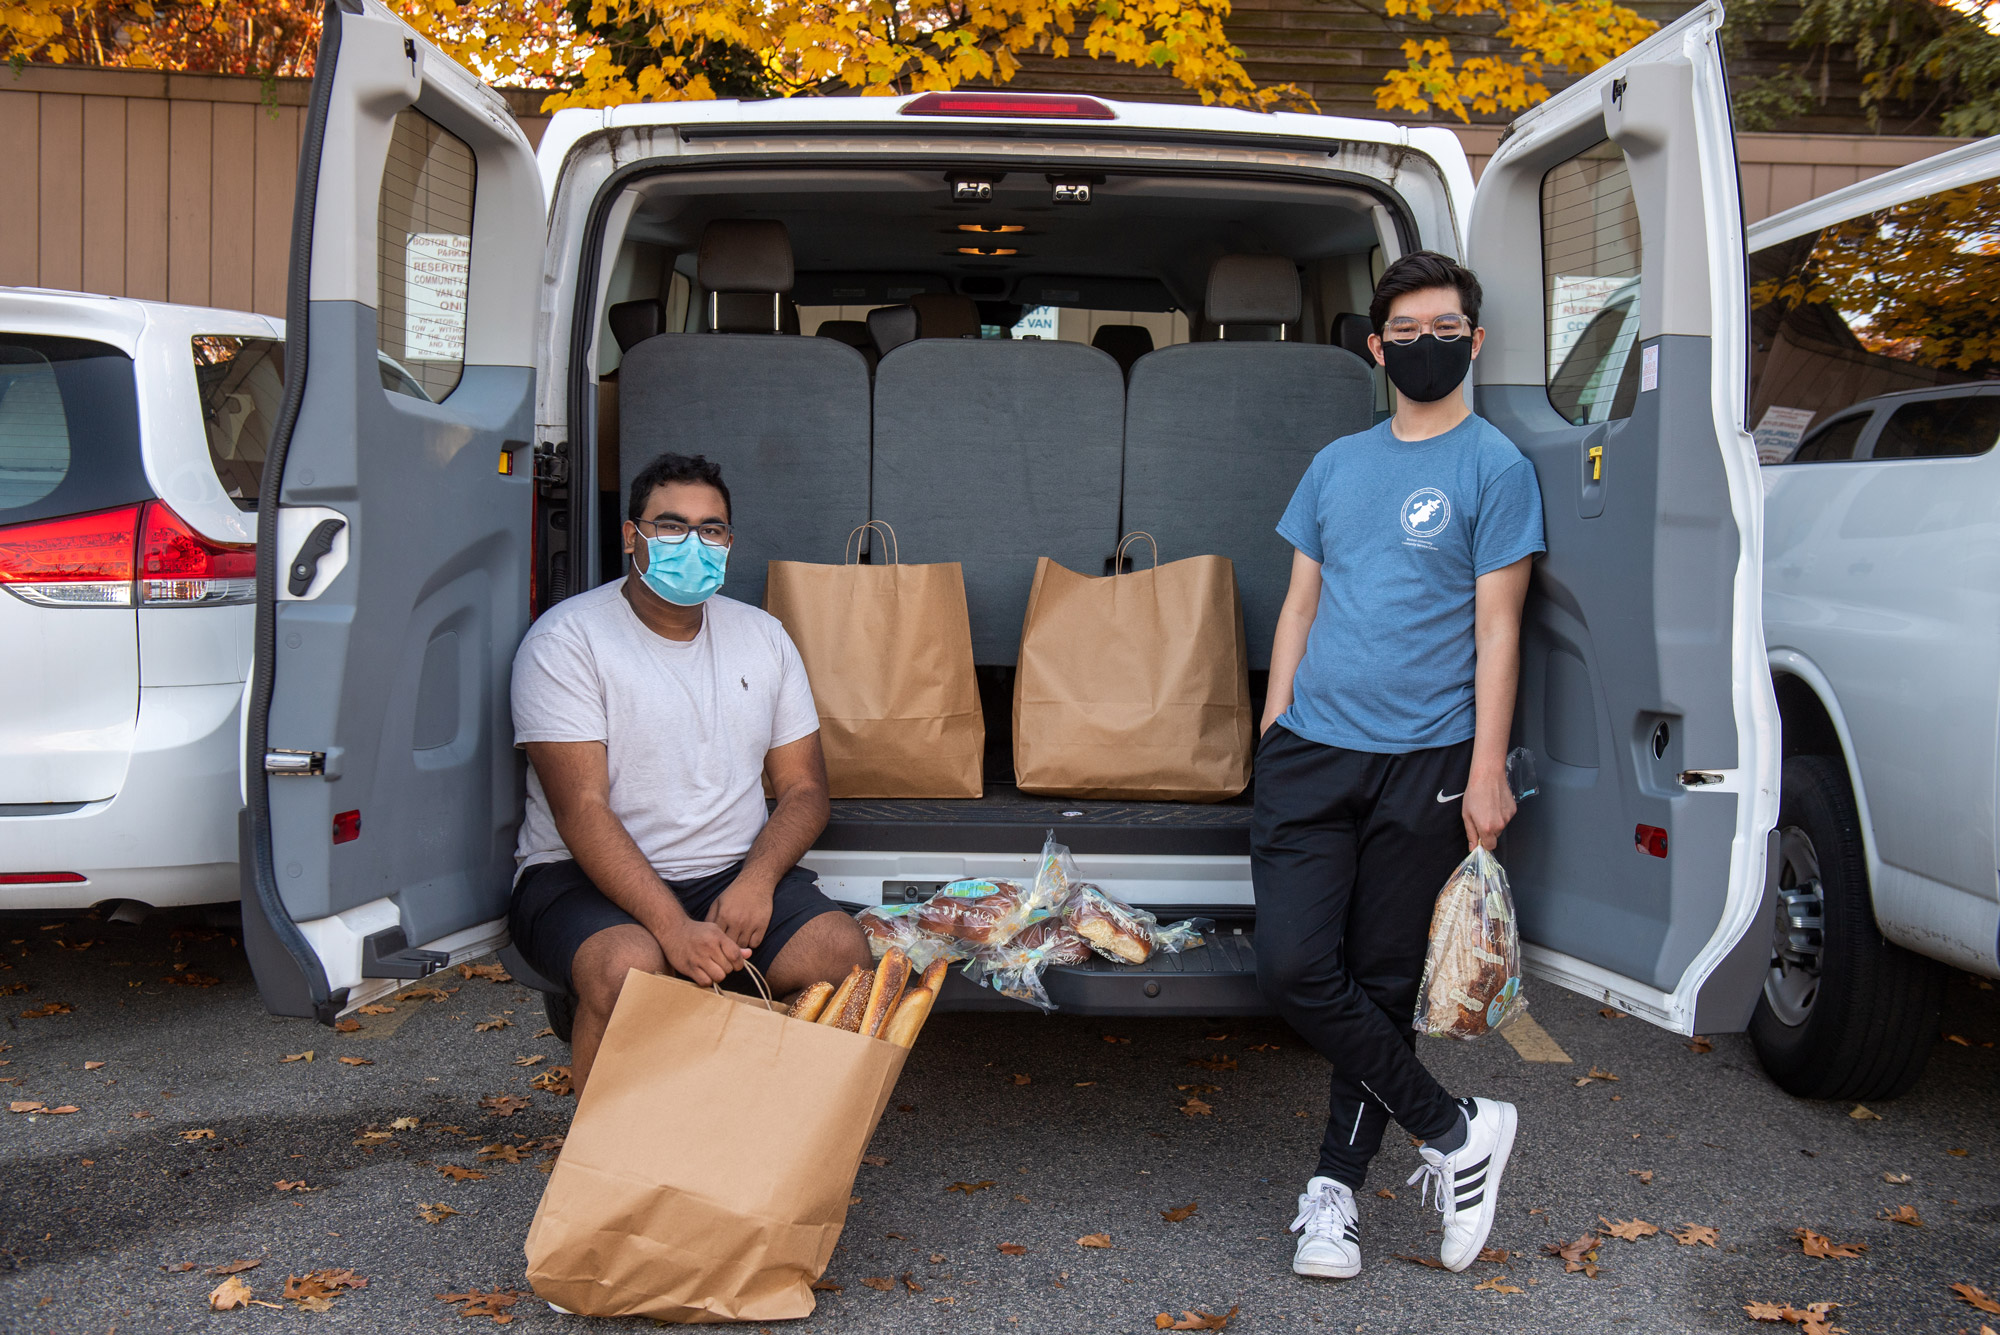 A photo of Saahil Adusumilli (SAR’22), at left, and Michael Gomez (SAR’21) from Student Food Rescue sitting in the back of a van with brown paper bags. They are both wearing masks.